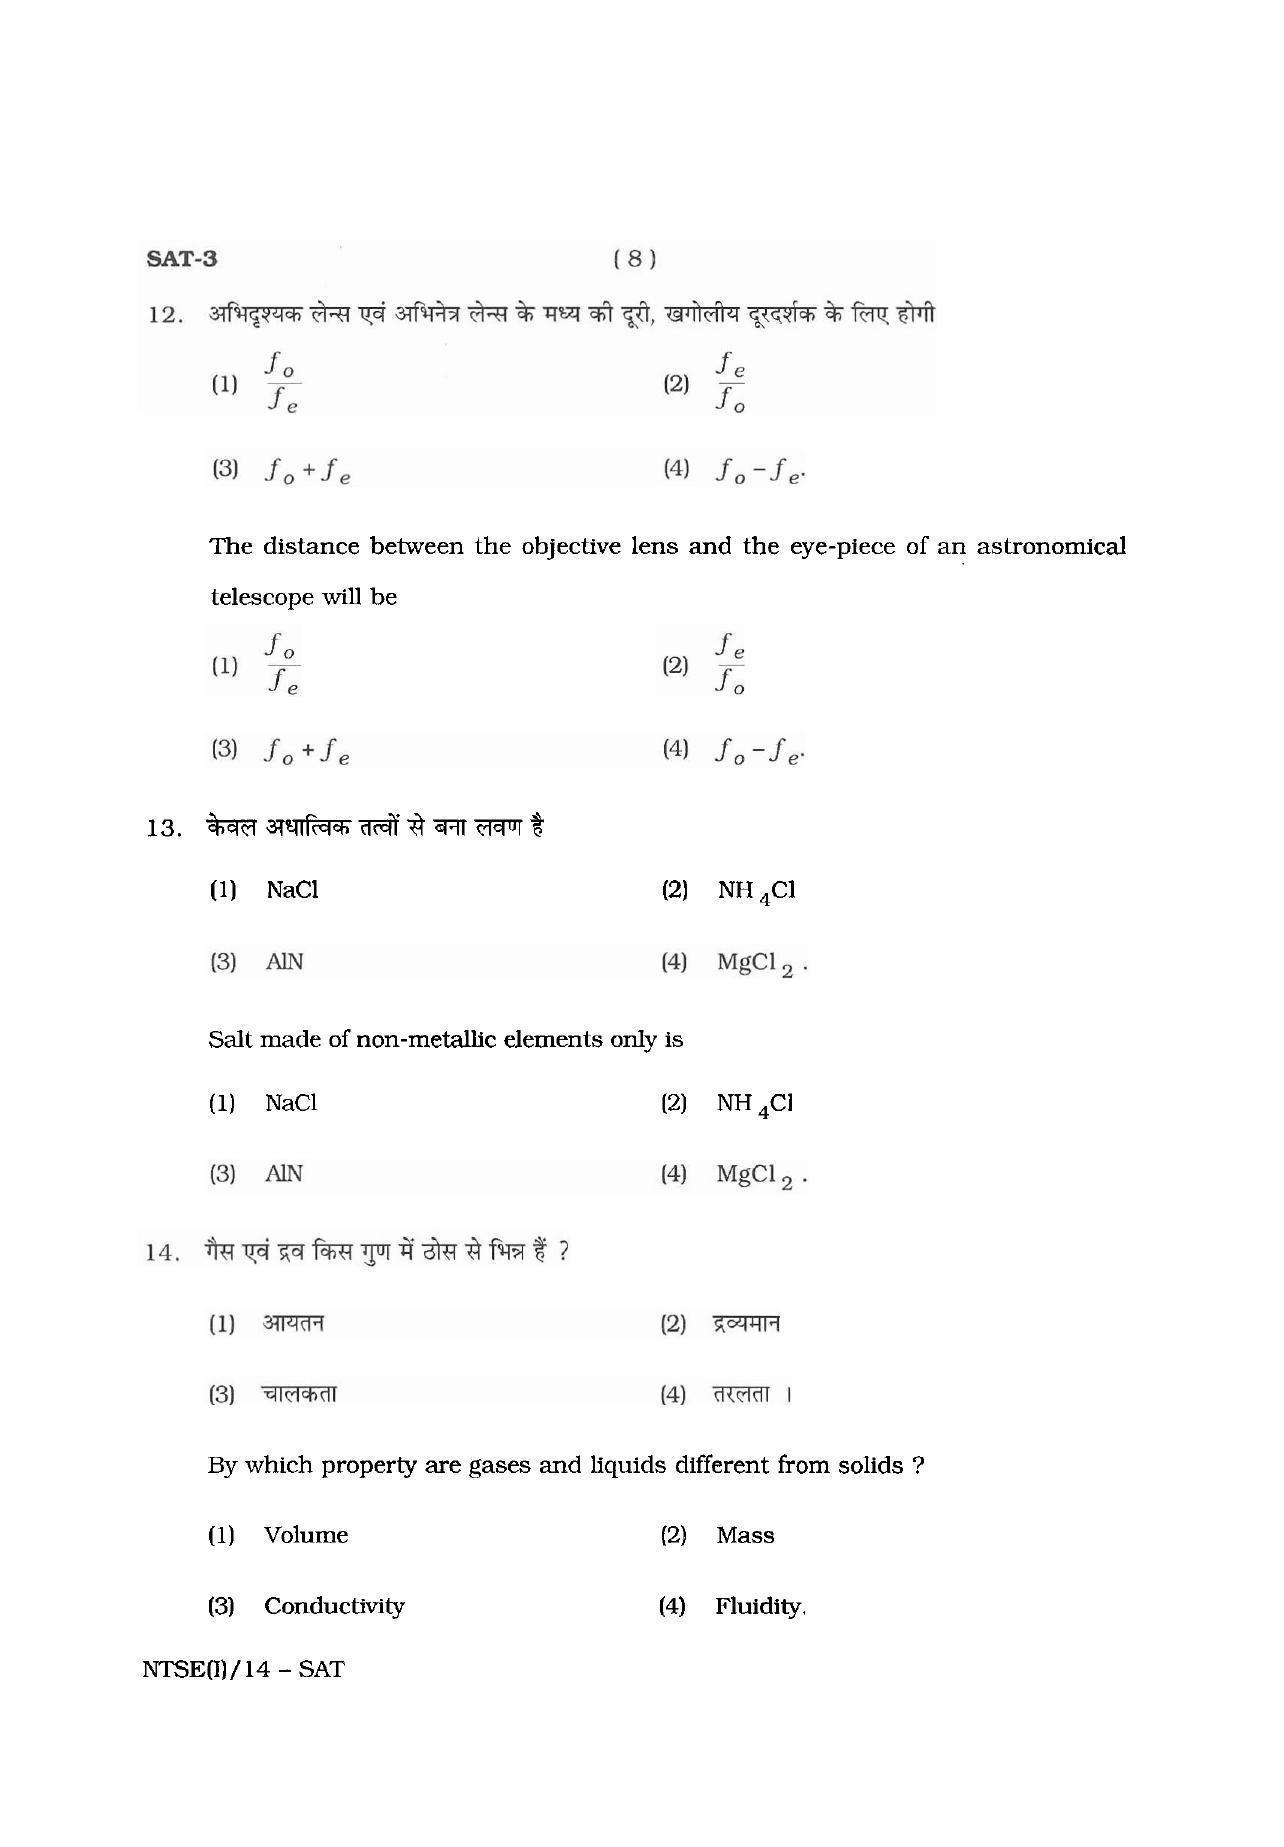 NTSE 2014 (Stage II) SAT Question Paper - Page 8